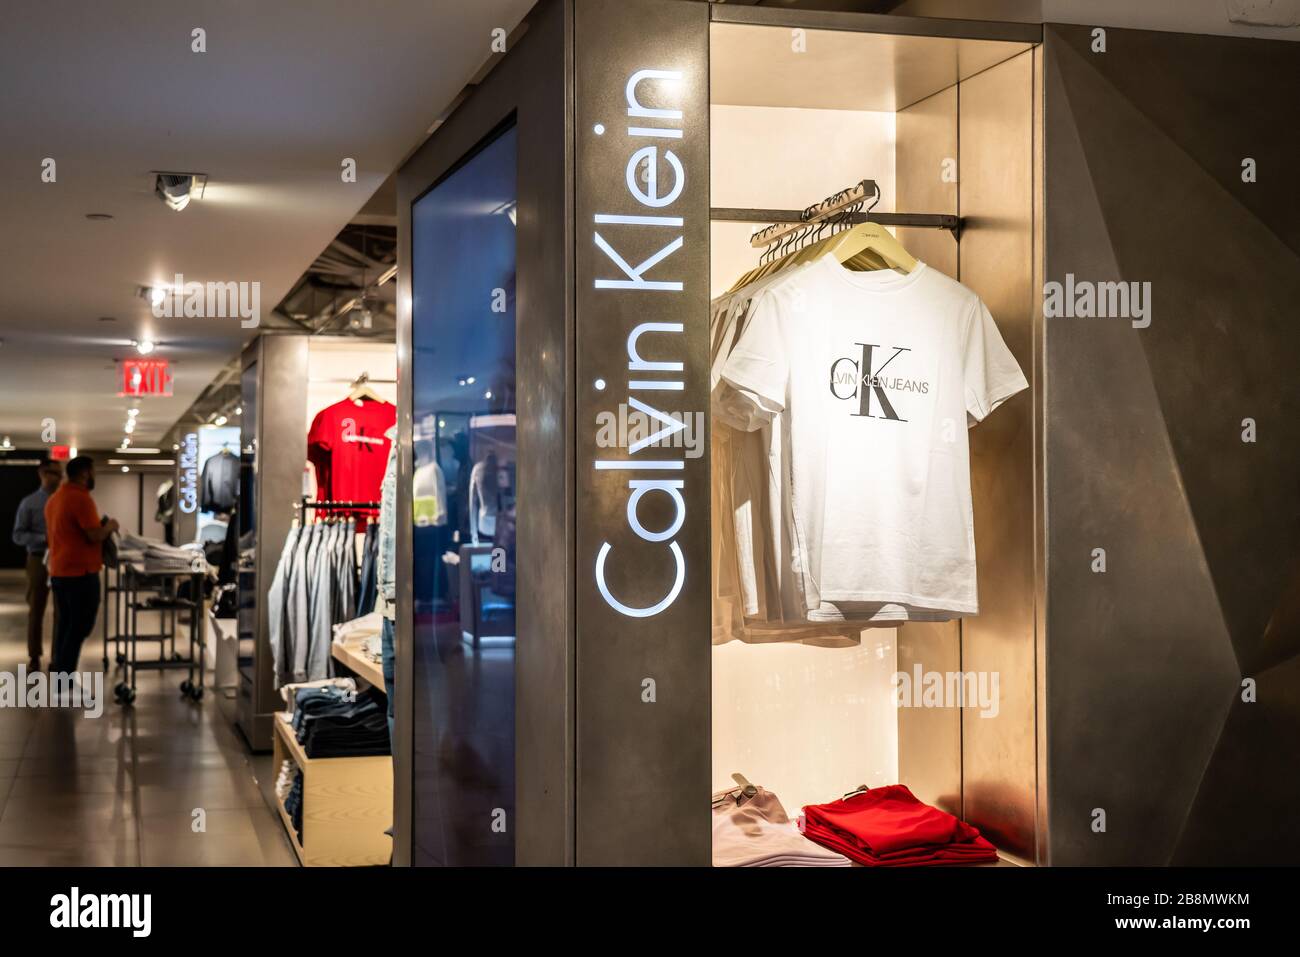 American fashion Calvin Klein store and logo seen in New York City Photo - Alamy